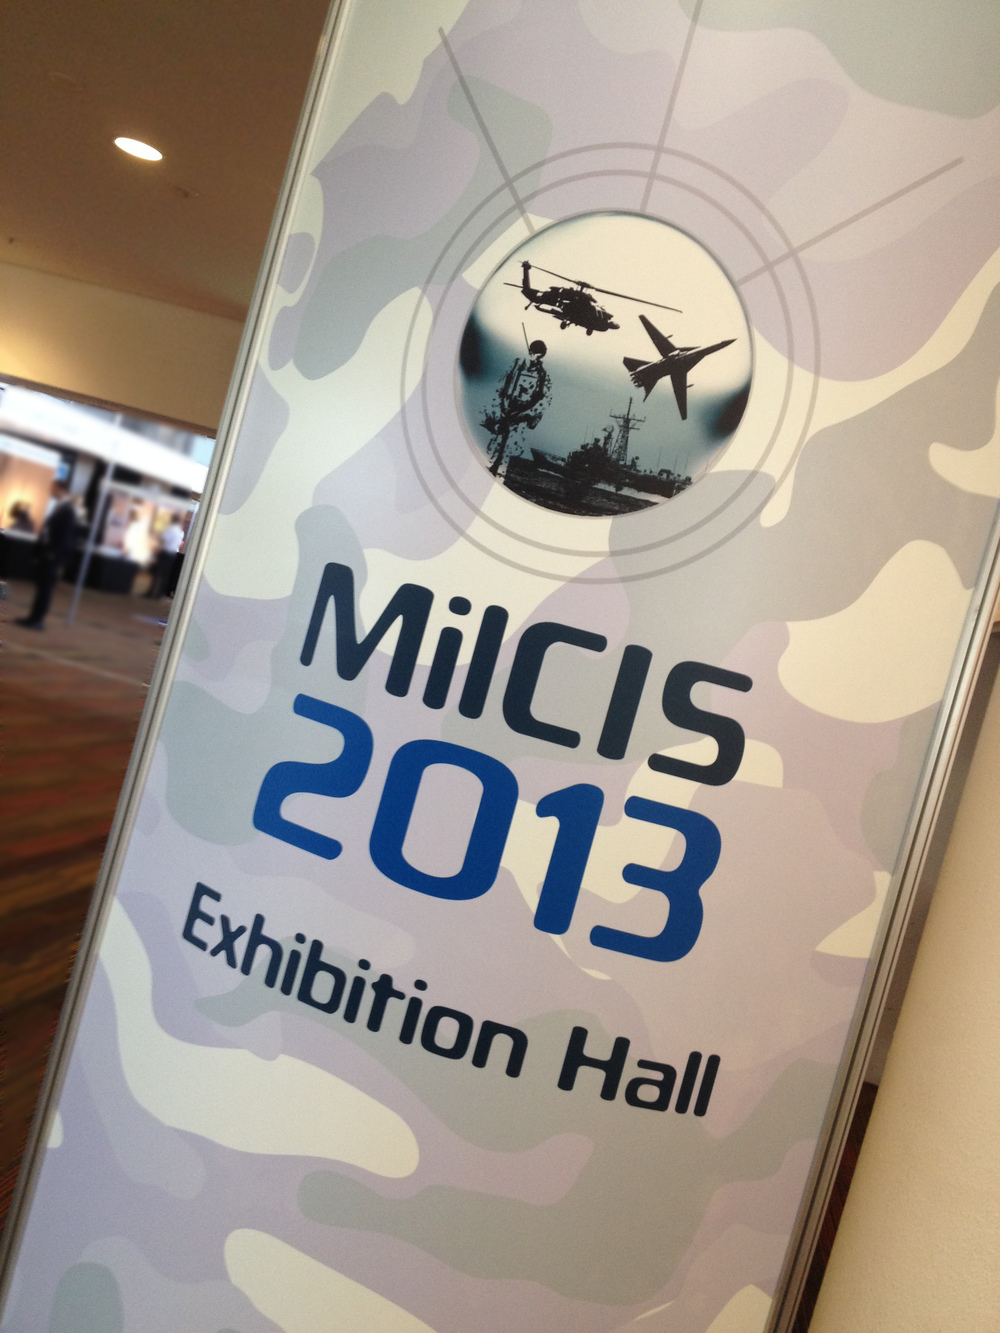 MilCIS 2013 conference